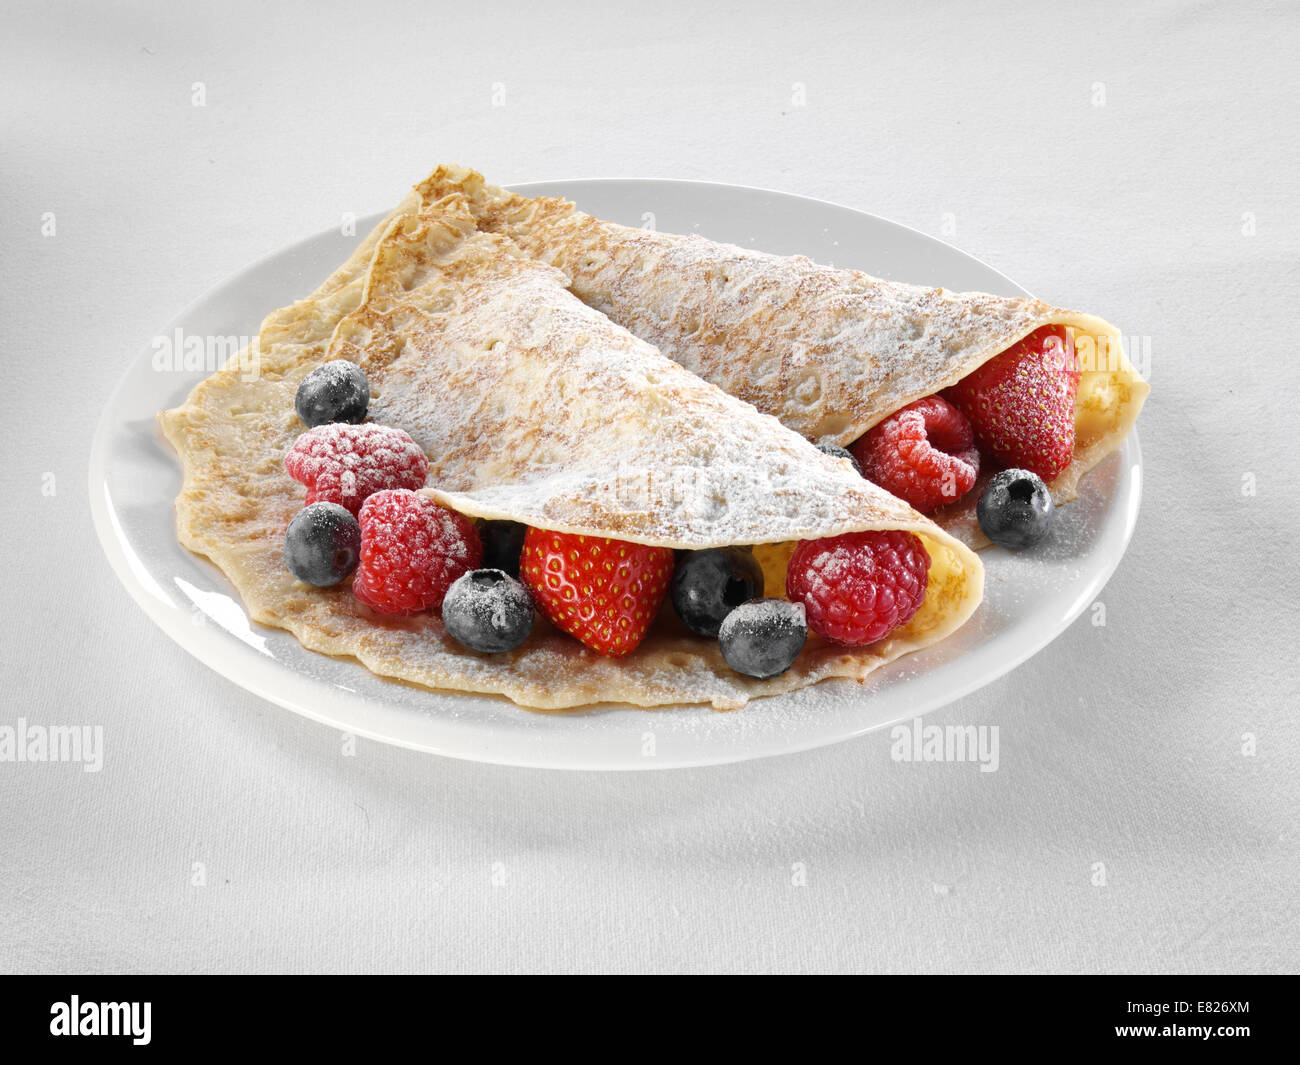 Crepes with fruit American breakfast Stock Photo